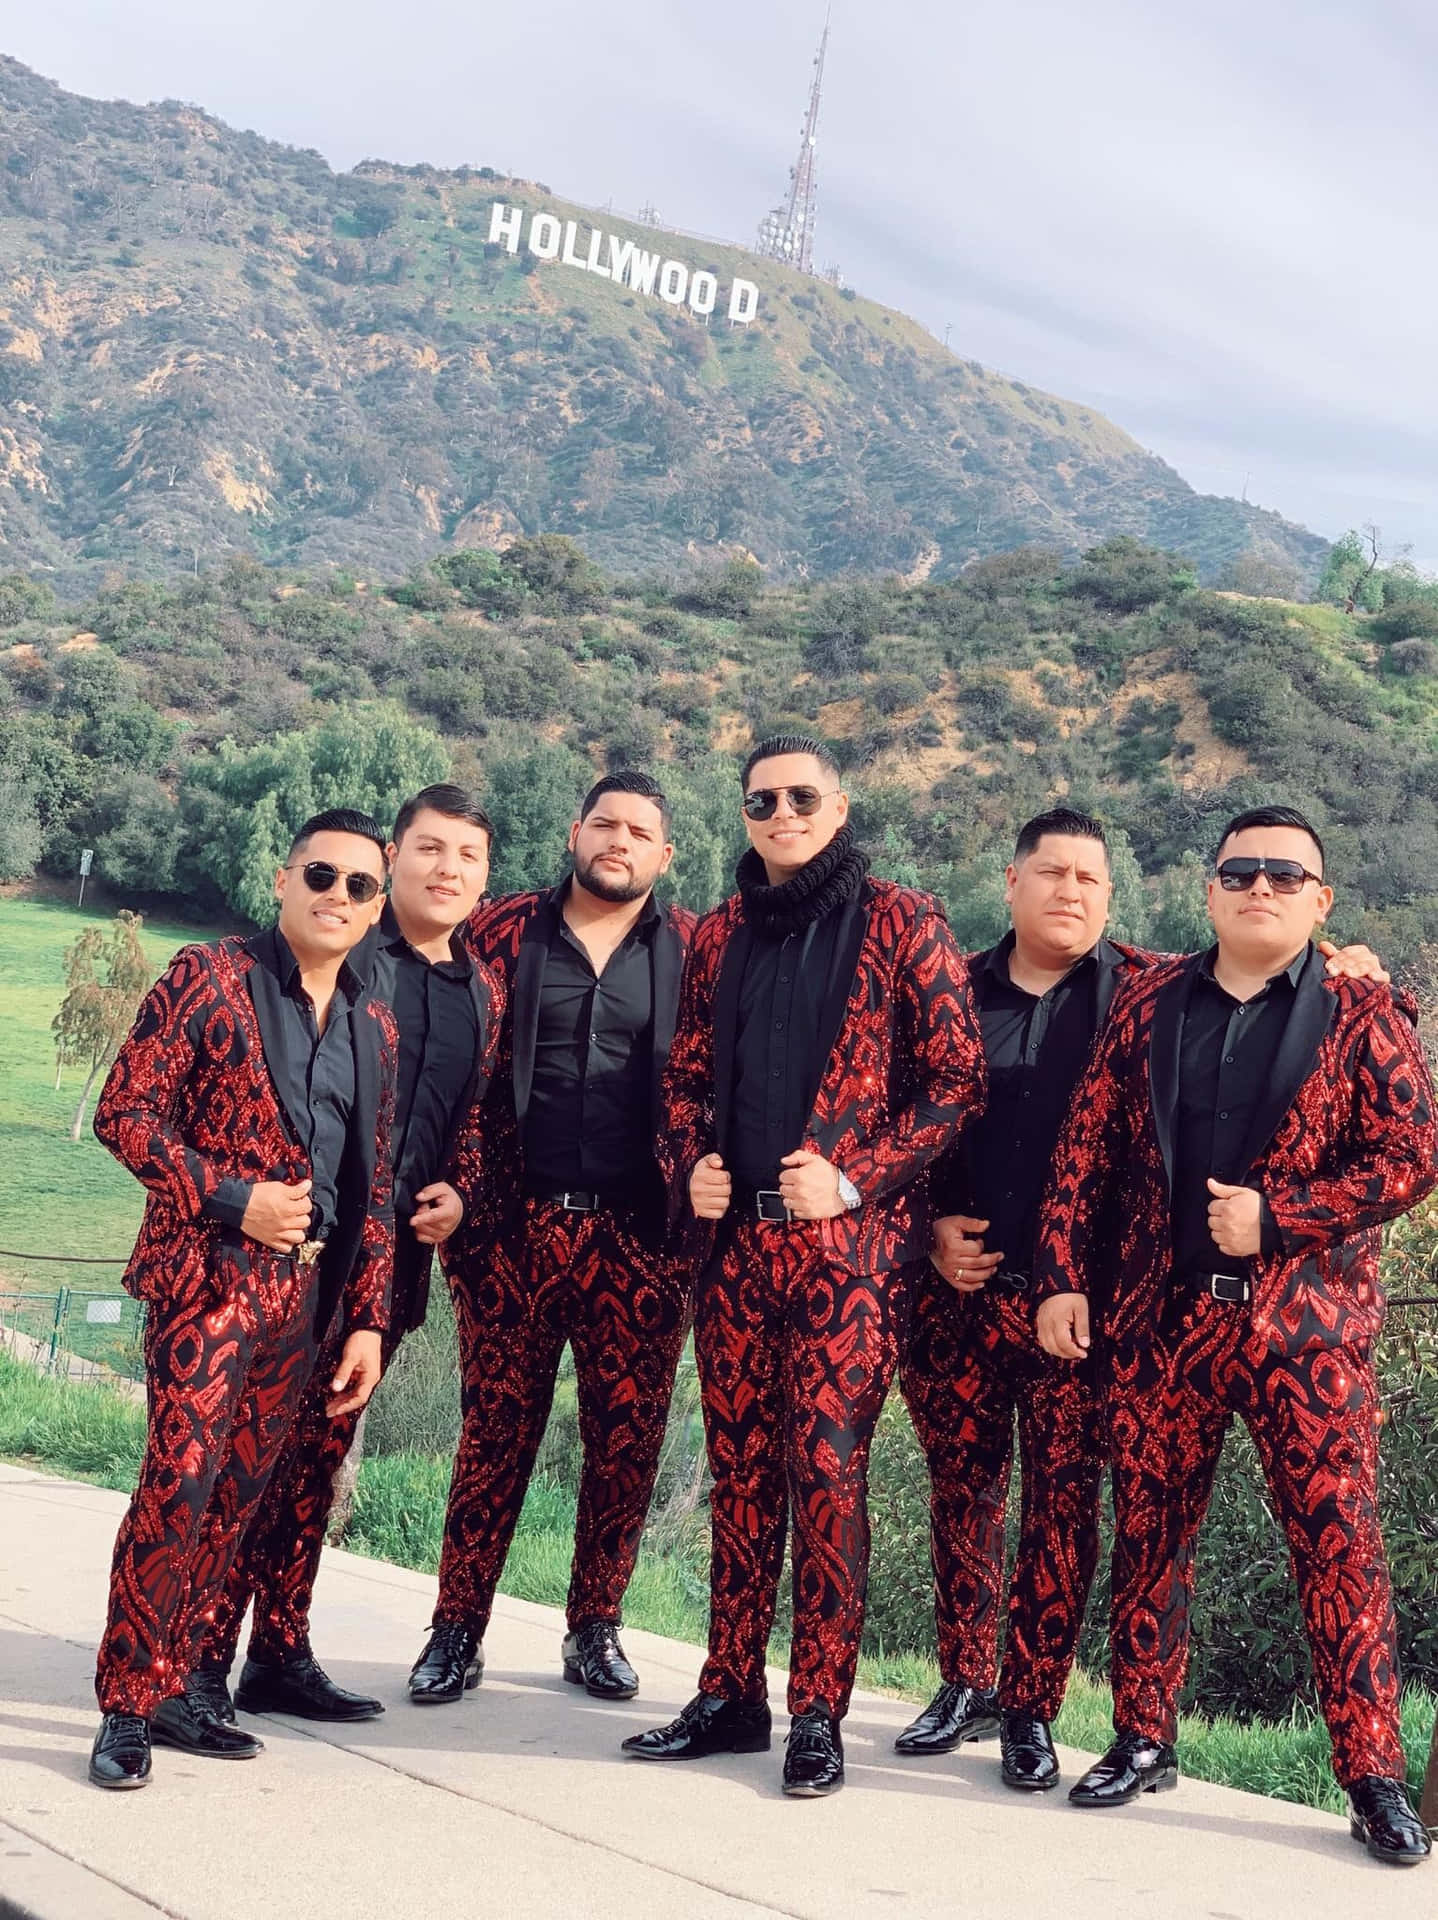 A Group Of Men In Suits Standing In Front Of The Hollywood Sign Wallpaper